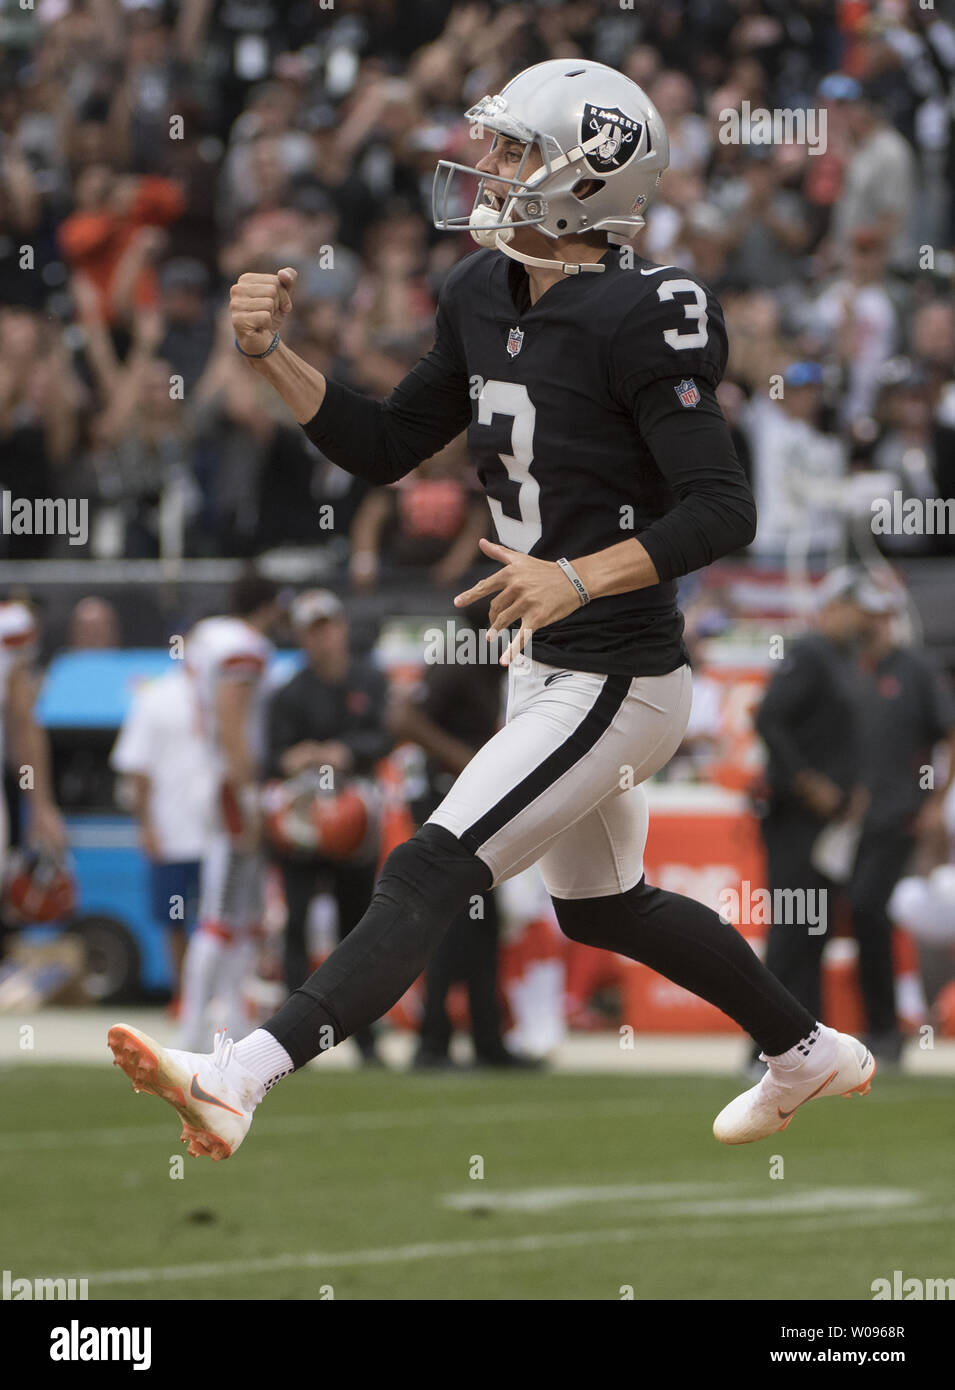 Oakland Raiders Matt McGrane (3) celebrates after kicking a 29 yrd field goal to defeate the Cleveland Browns in overtime at the Coliseum in Oakland, California on September 30, 2018. The Raiders won 45-42.     Photo by Terry Schmitt/UPI Stock Photo